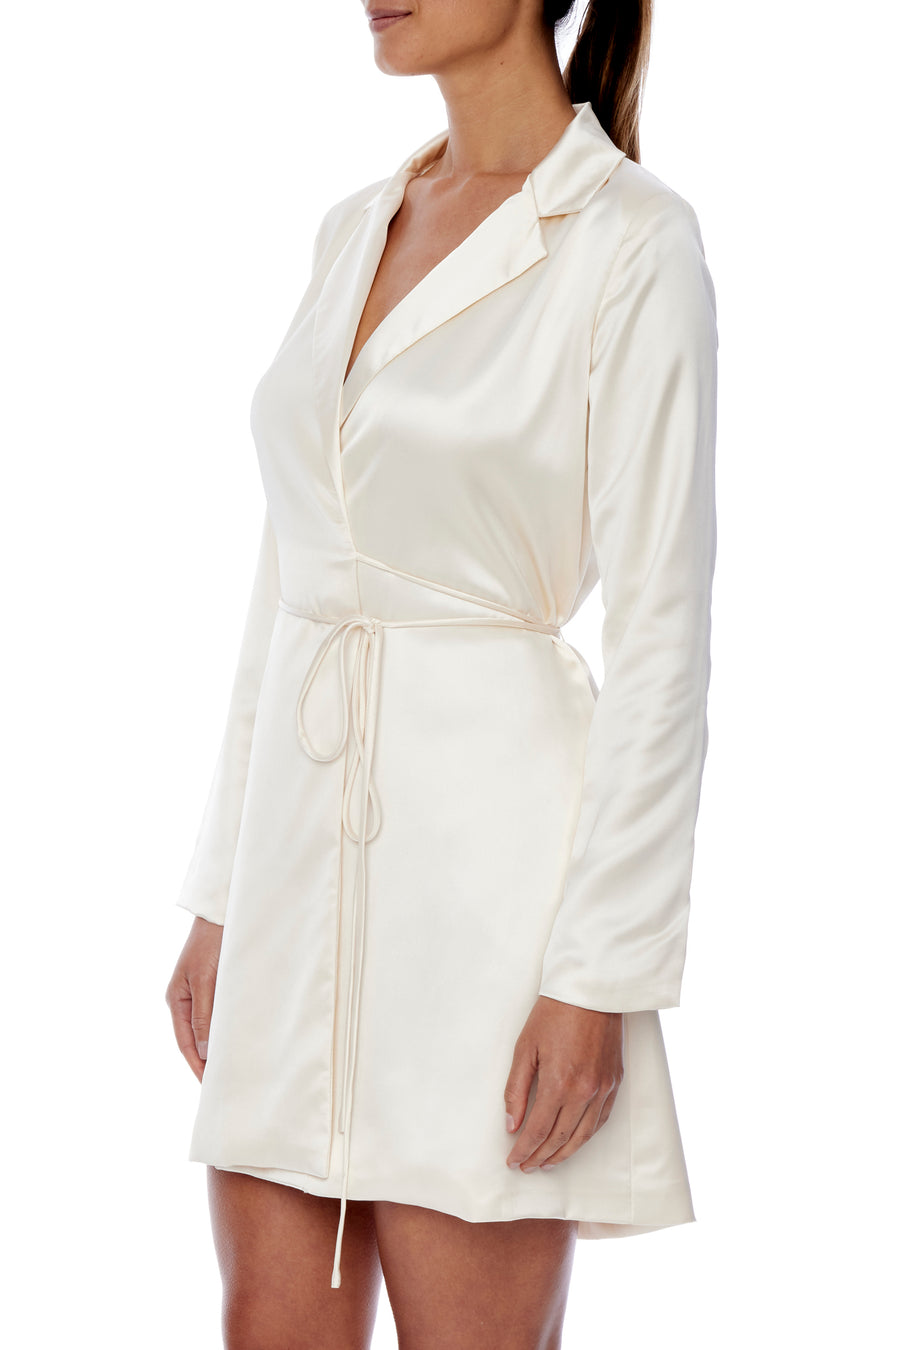 Collared, faux silk, wrap dress with attached belt that can be tied in front or at side - Side